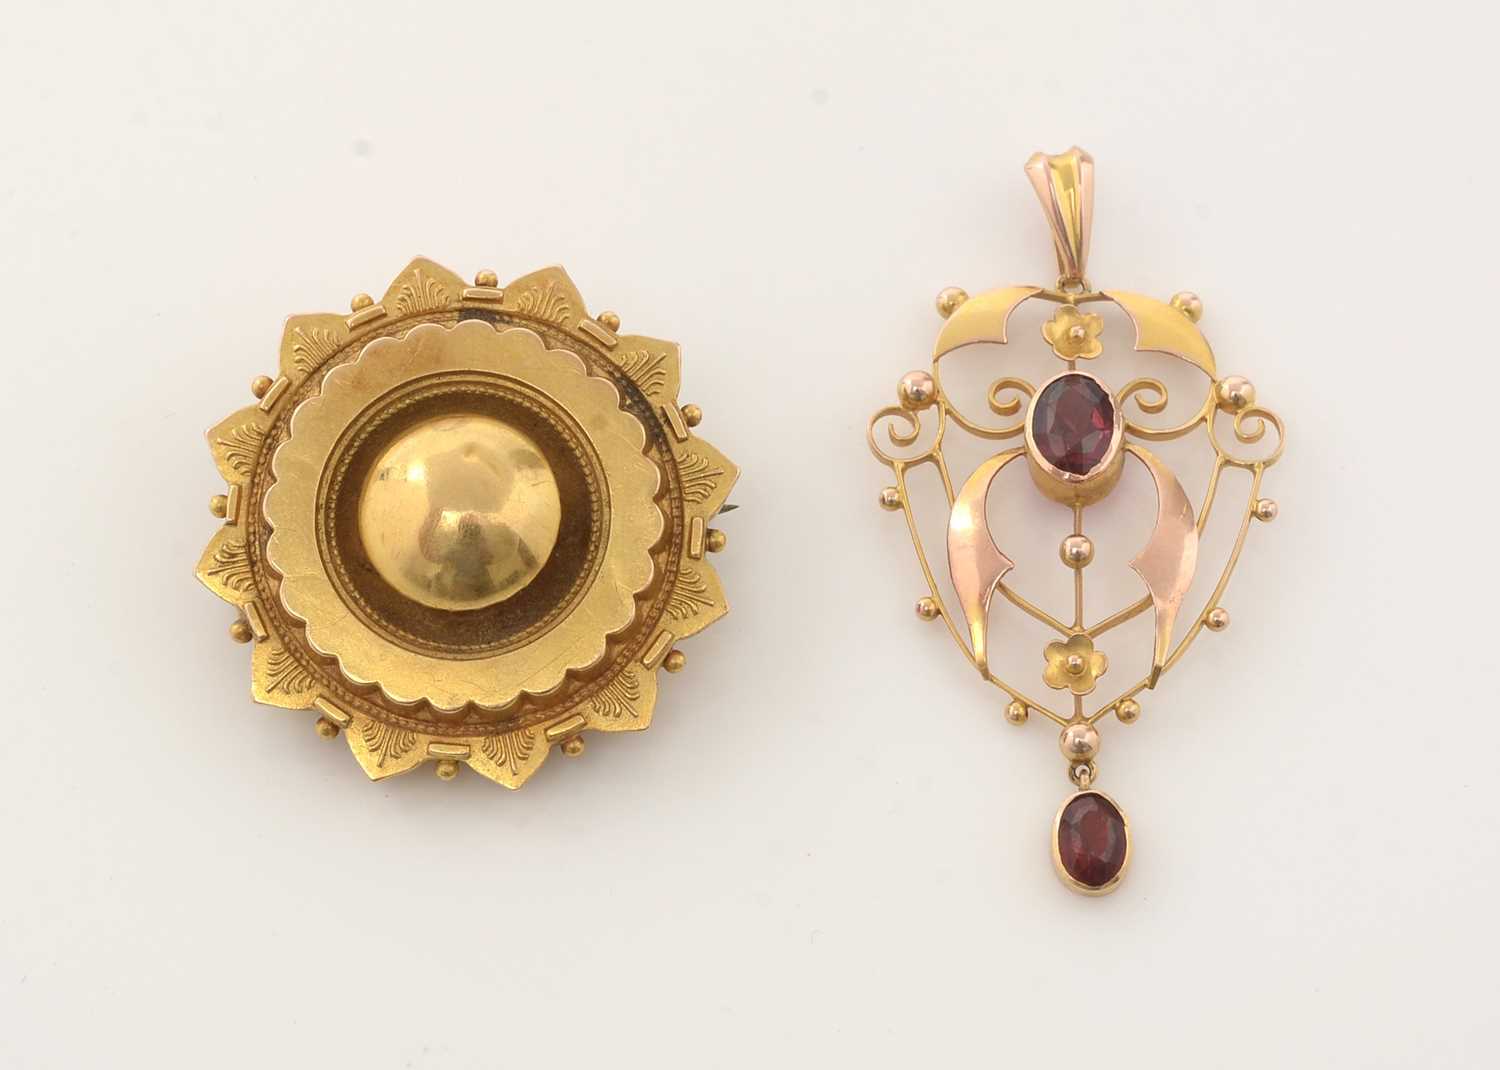 Lot 273 - An Edwardian pendant and a Victorian brooch